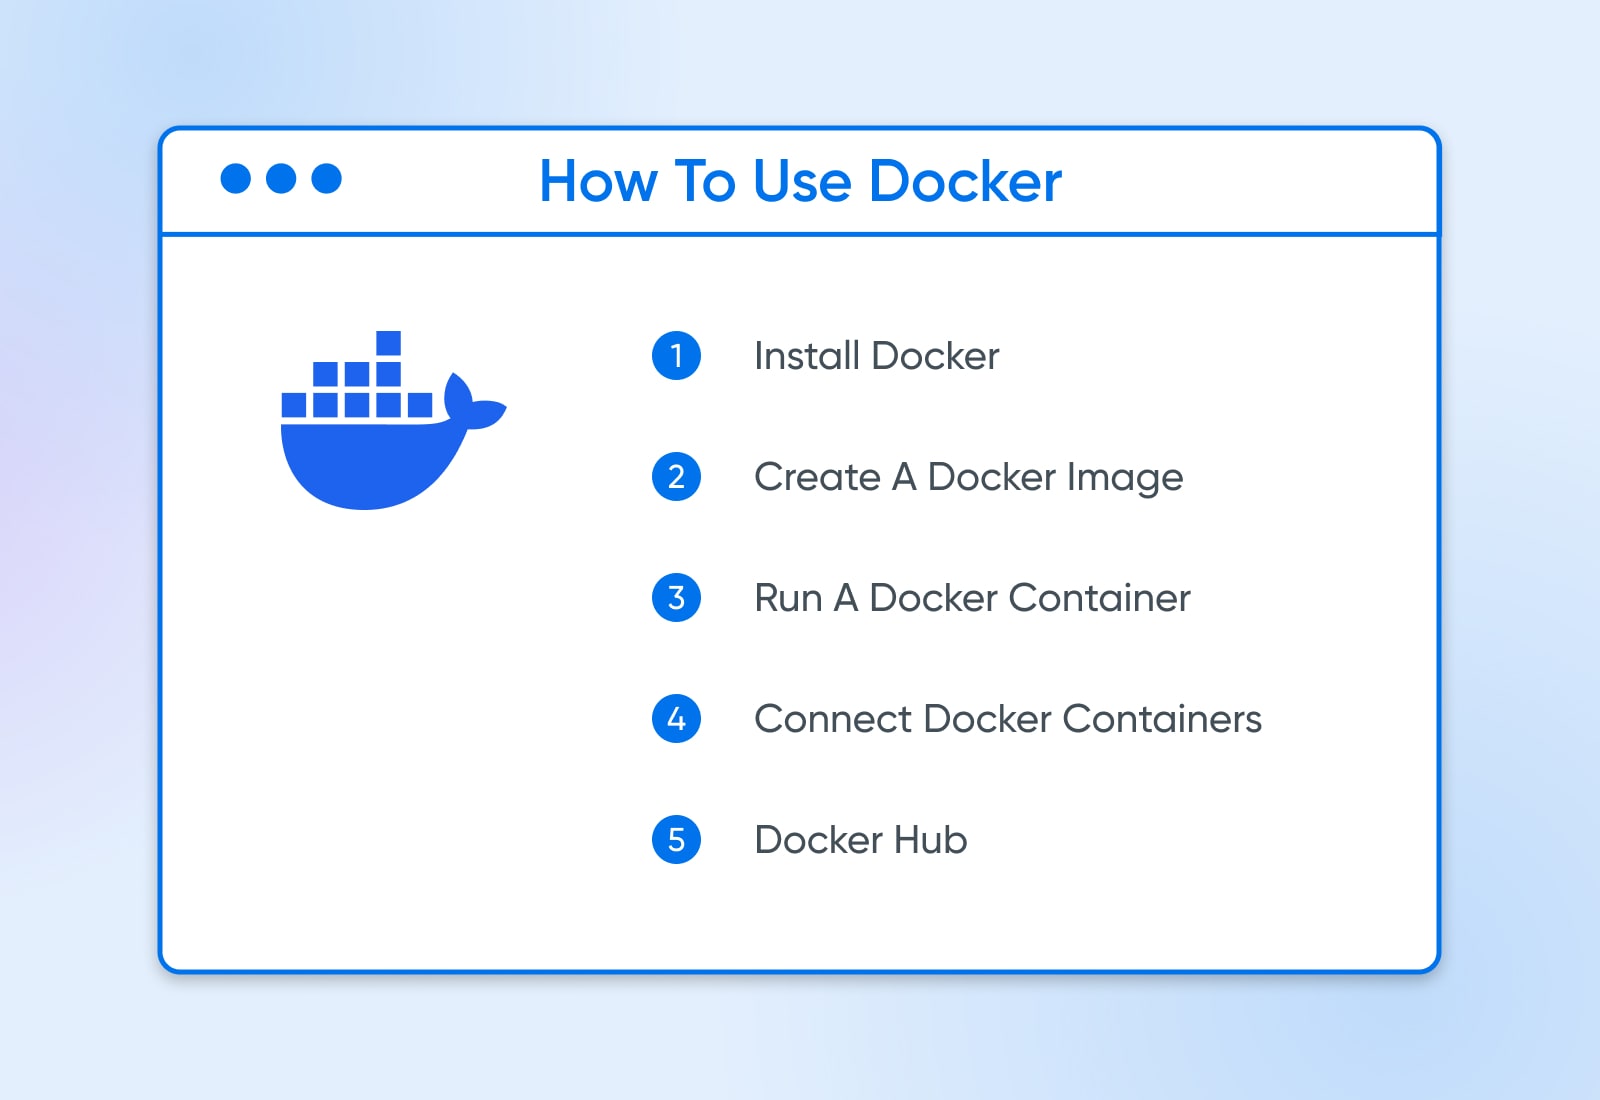 A "How To Use Docker" diagram with 5 steps outlined in a numbered list and Docker's logo on the left.